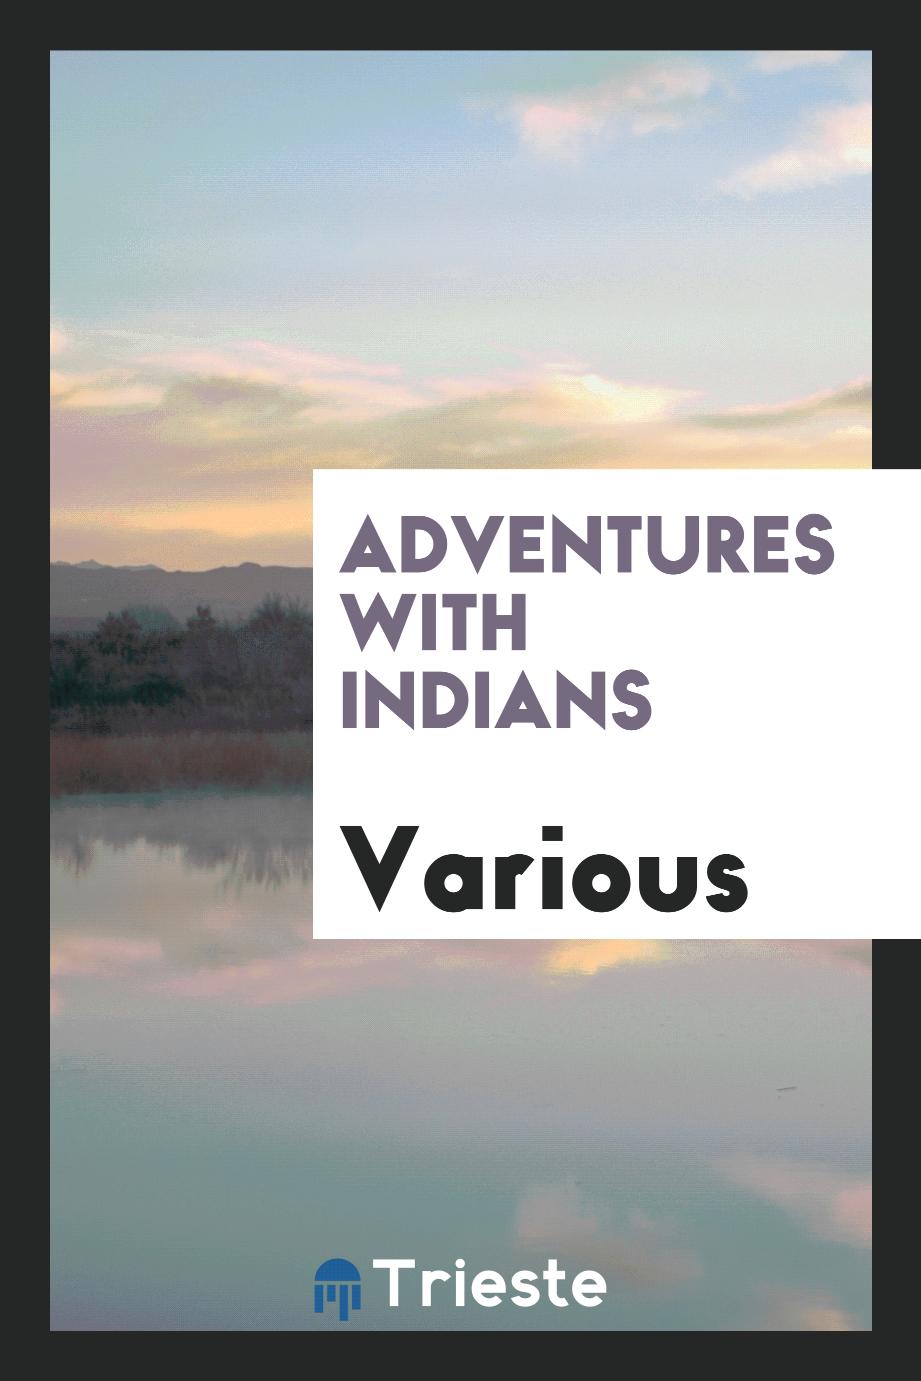 Adventures with Indians